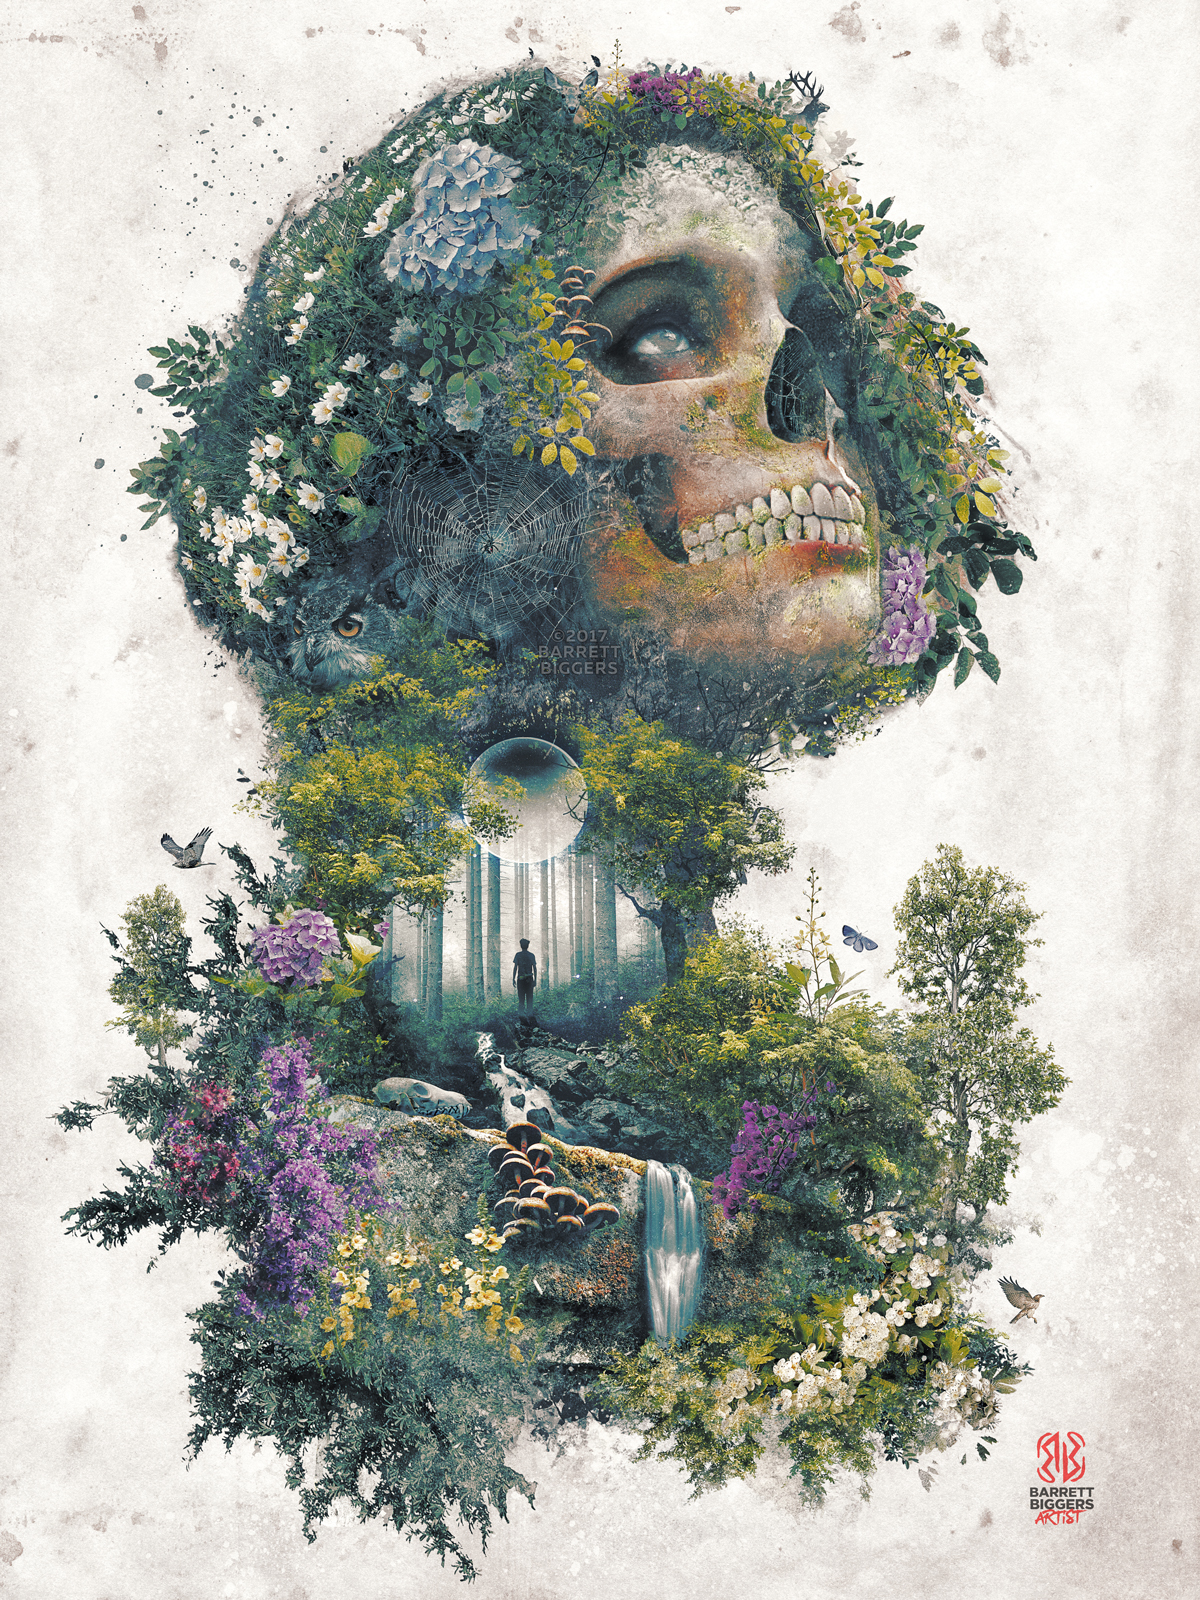 Life and Death My Nature Skull Surrealism Fantasy Art on Behance